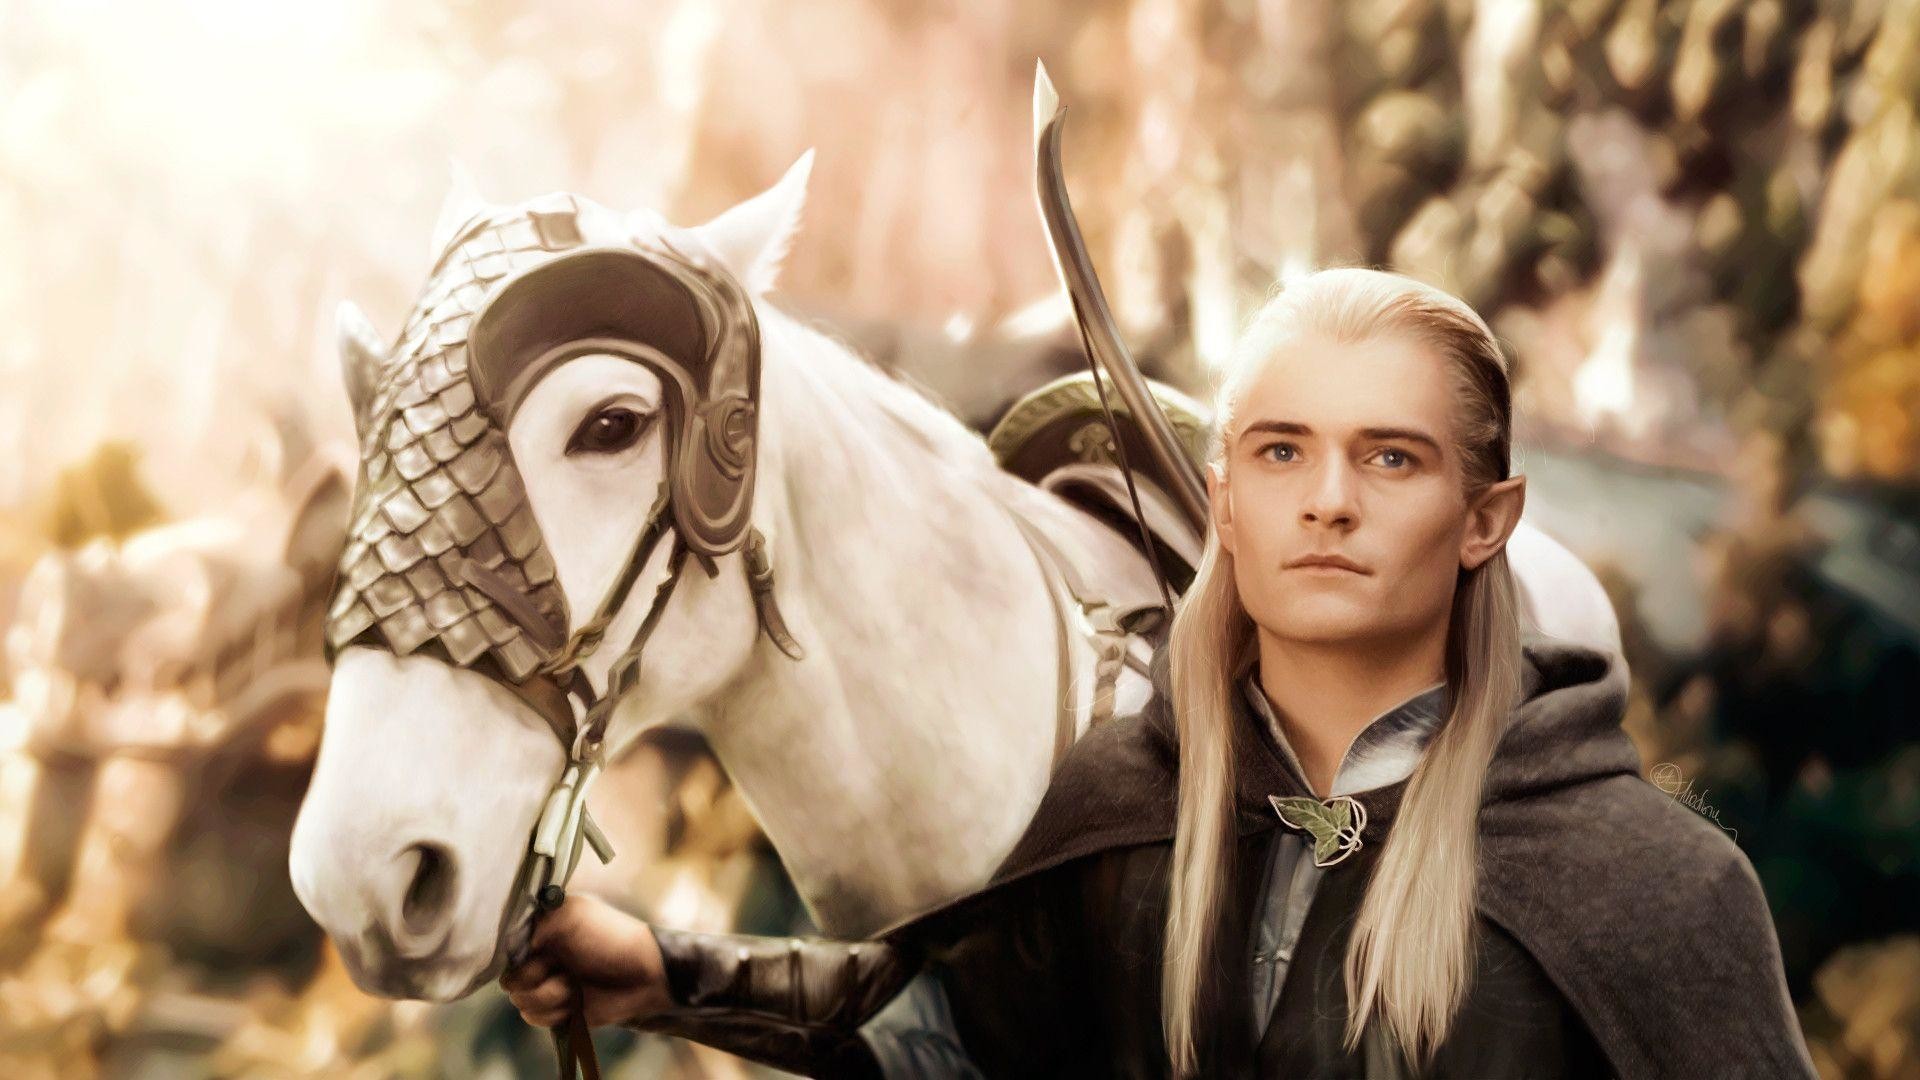 1920x1080 FunMozar – Orlando Bloom As Legolas In The Lord of the Rings